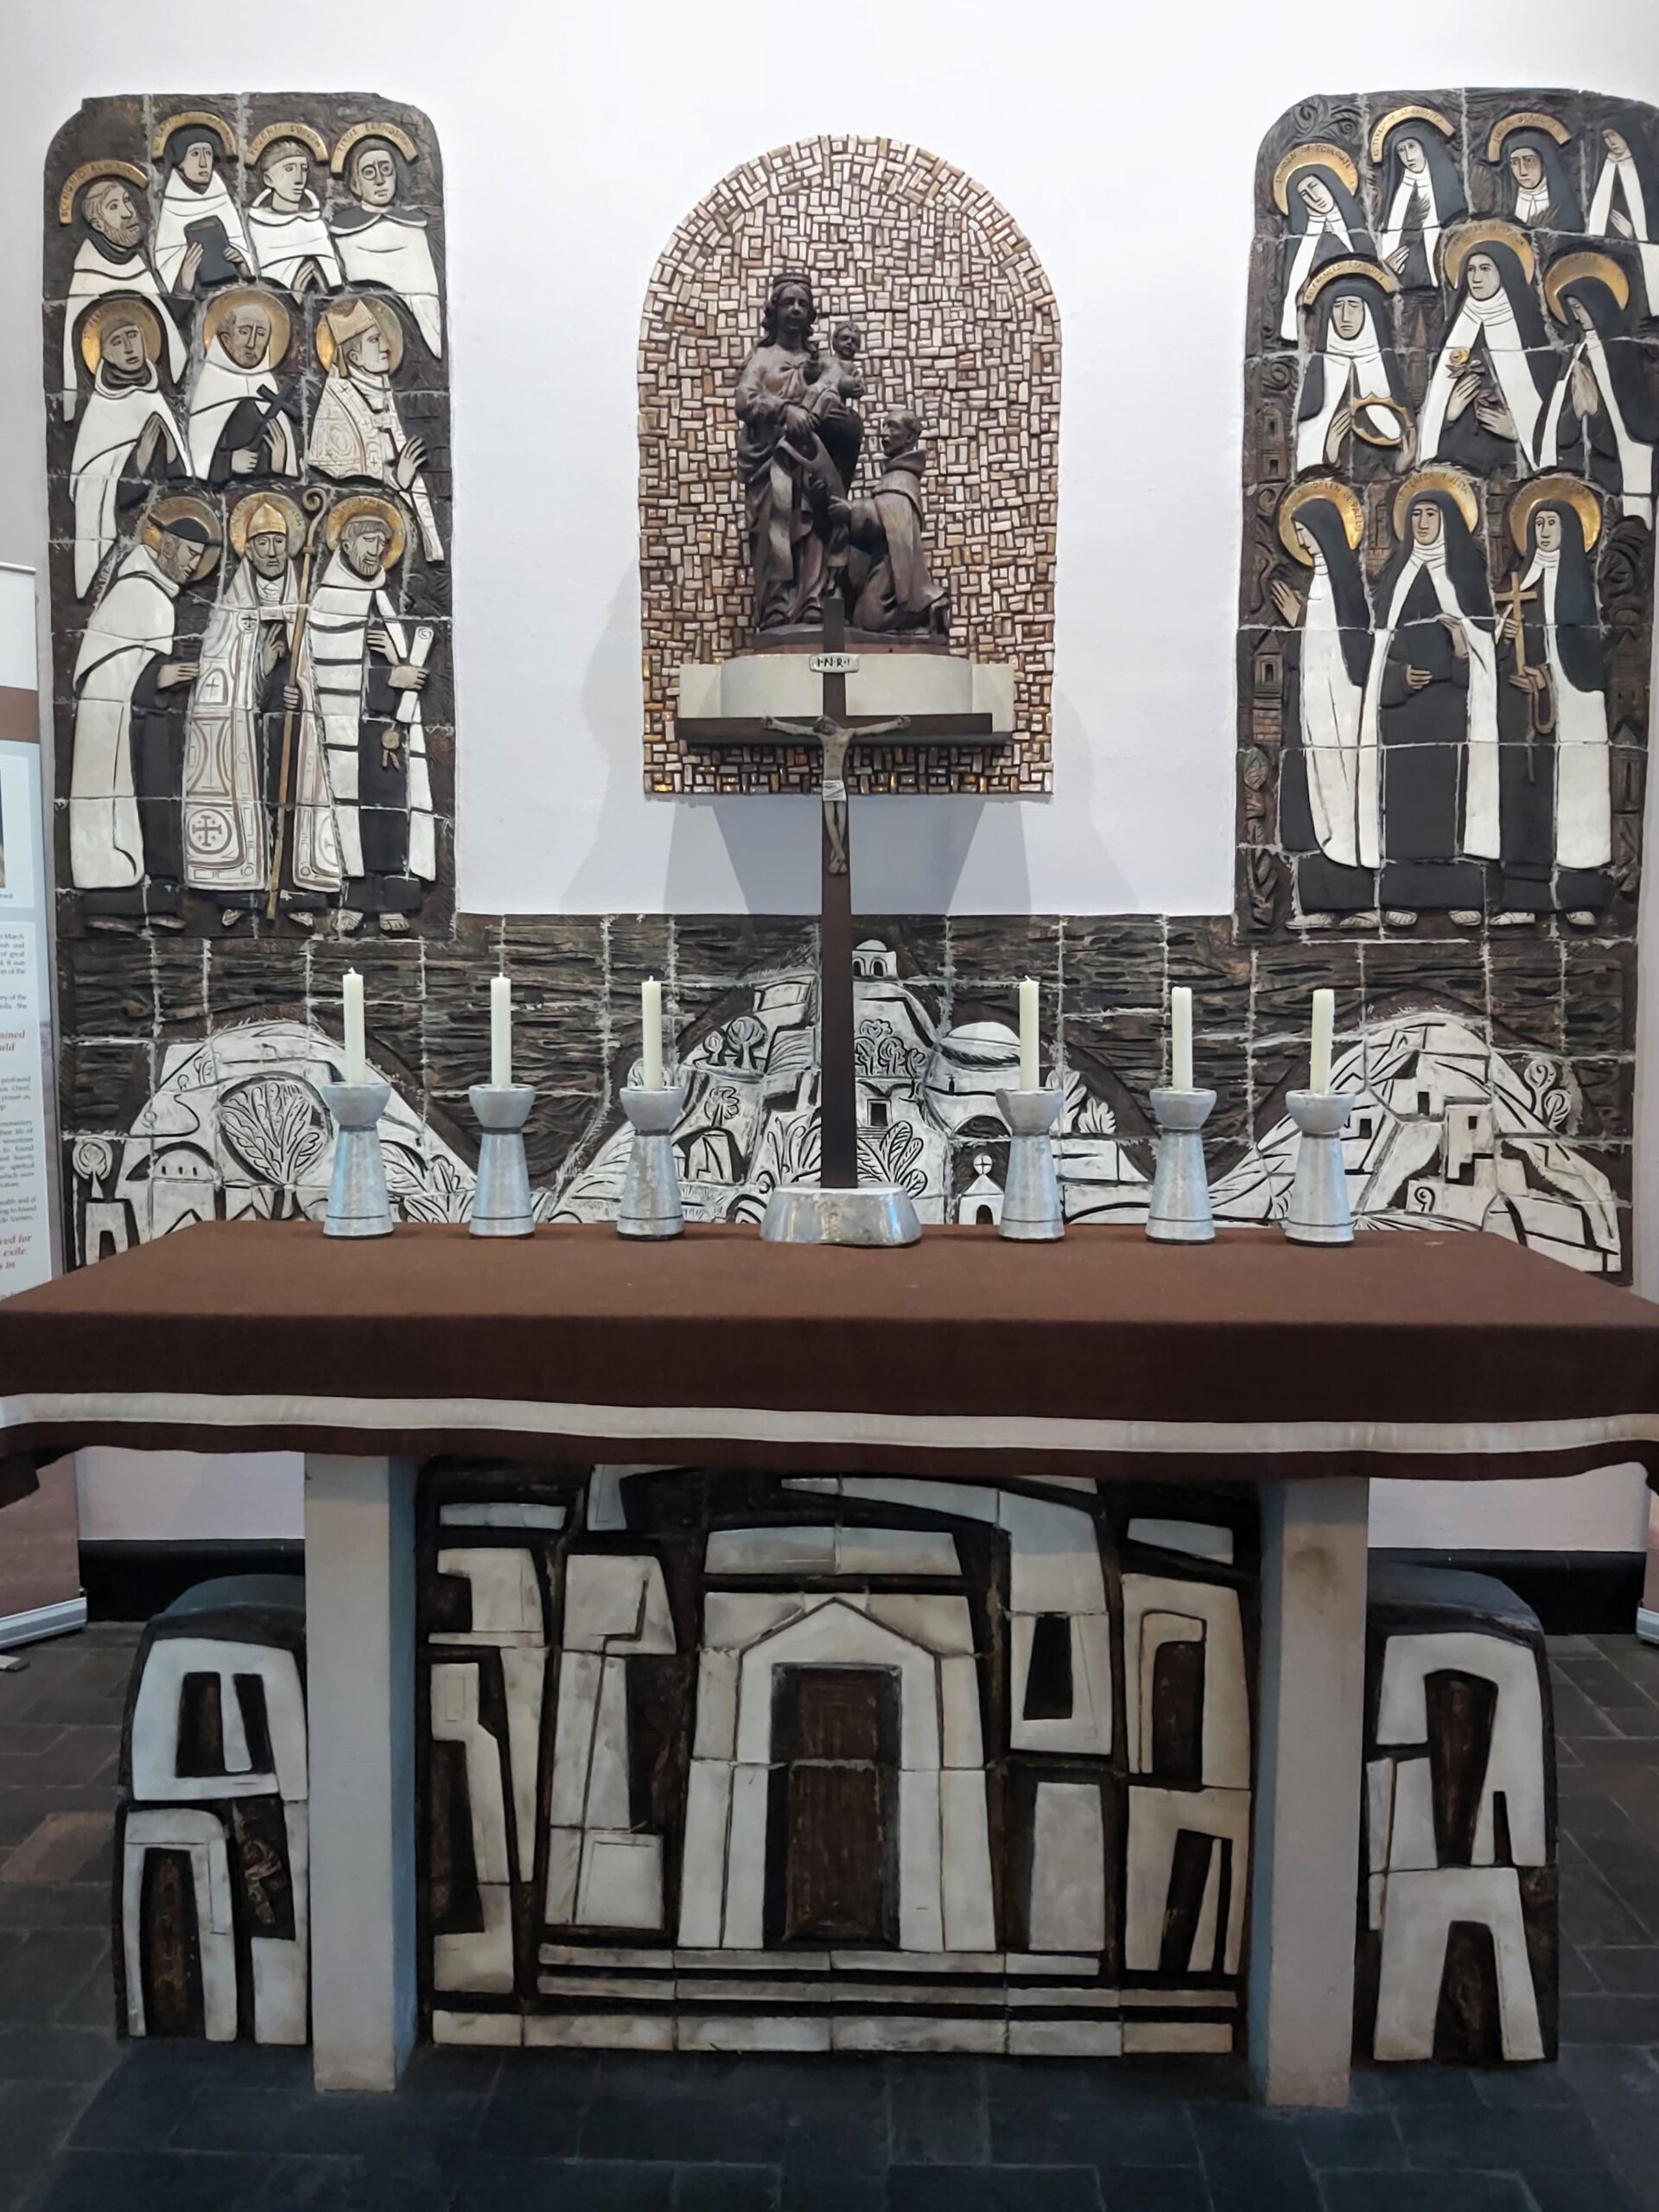 A brown and cream artistic style altar in The Friars Aylesford Priory, Kent, England